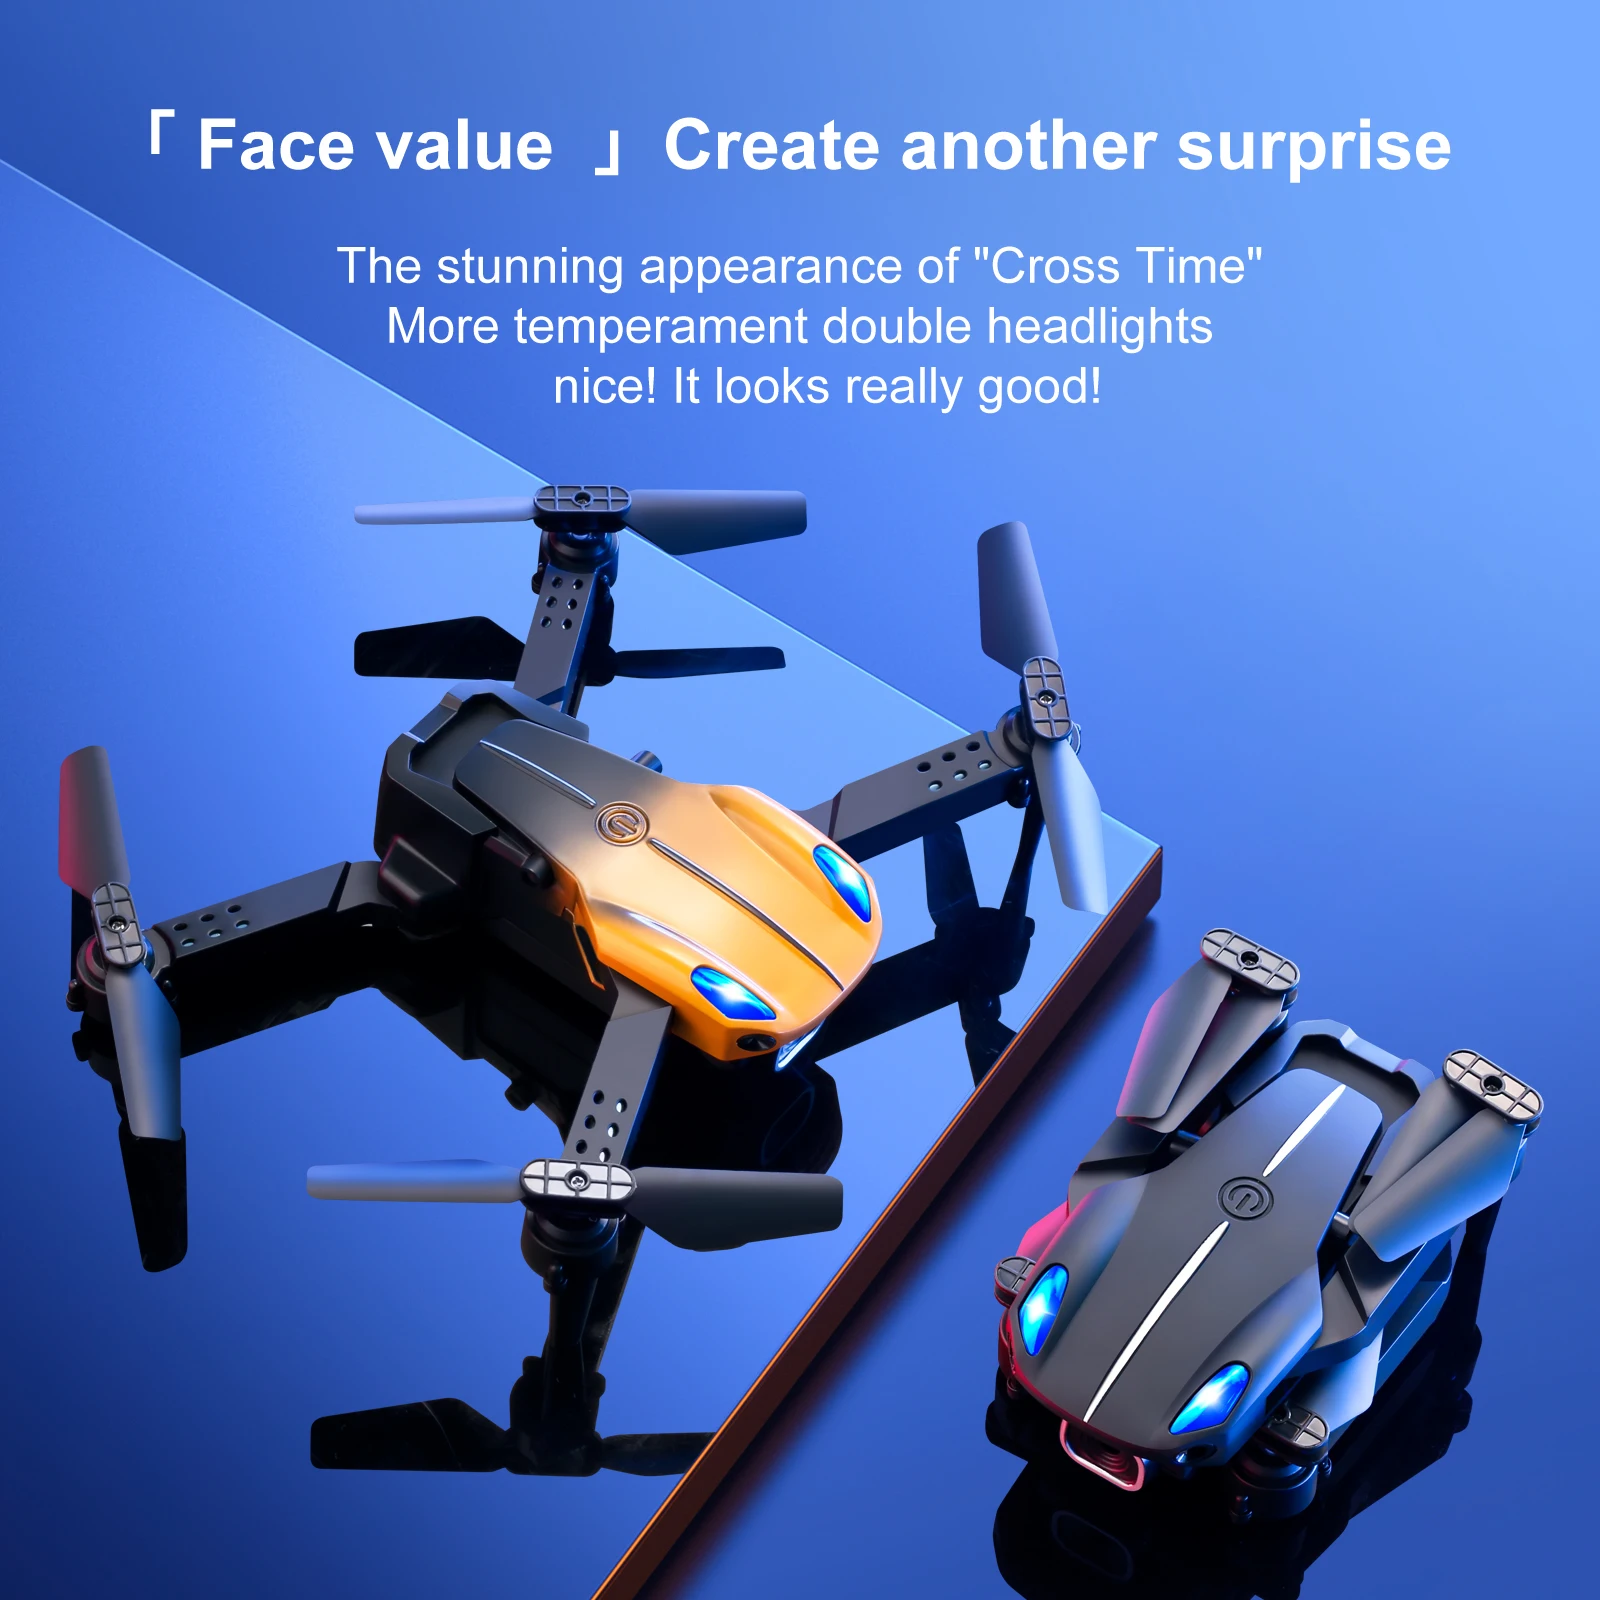 KY907 PRO Drone, f face value j create another surprise the stunning appearance of "